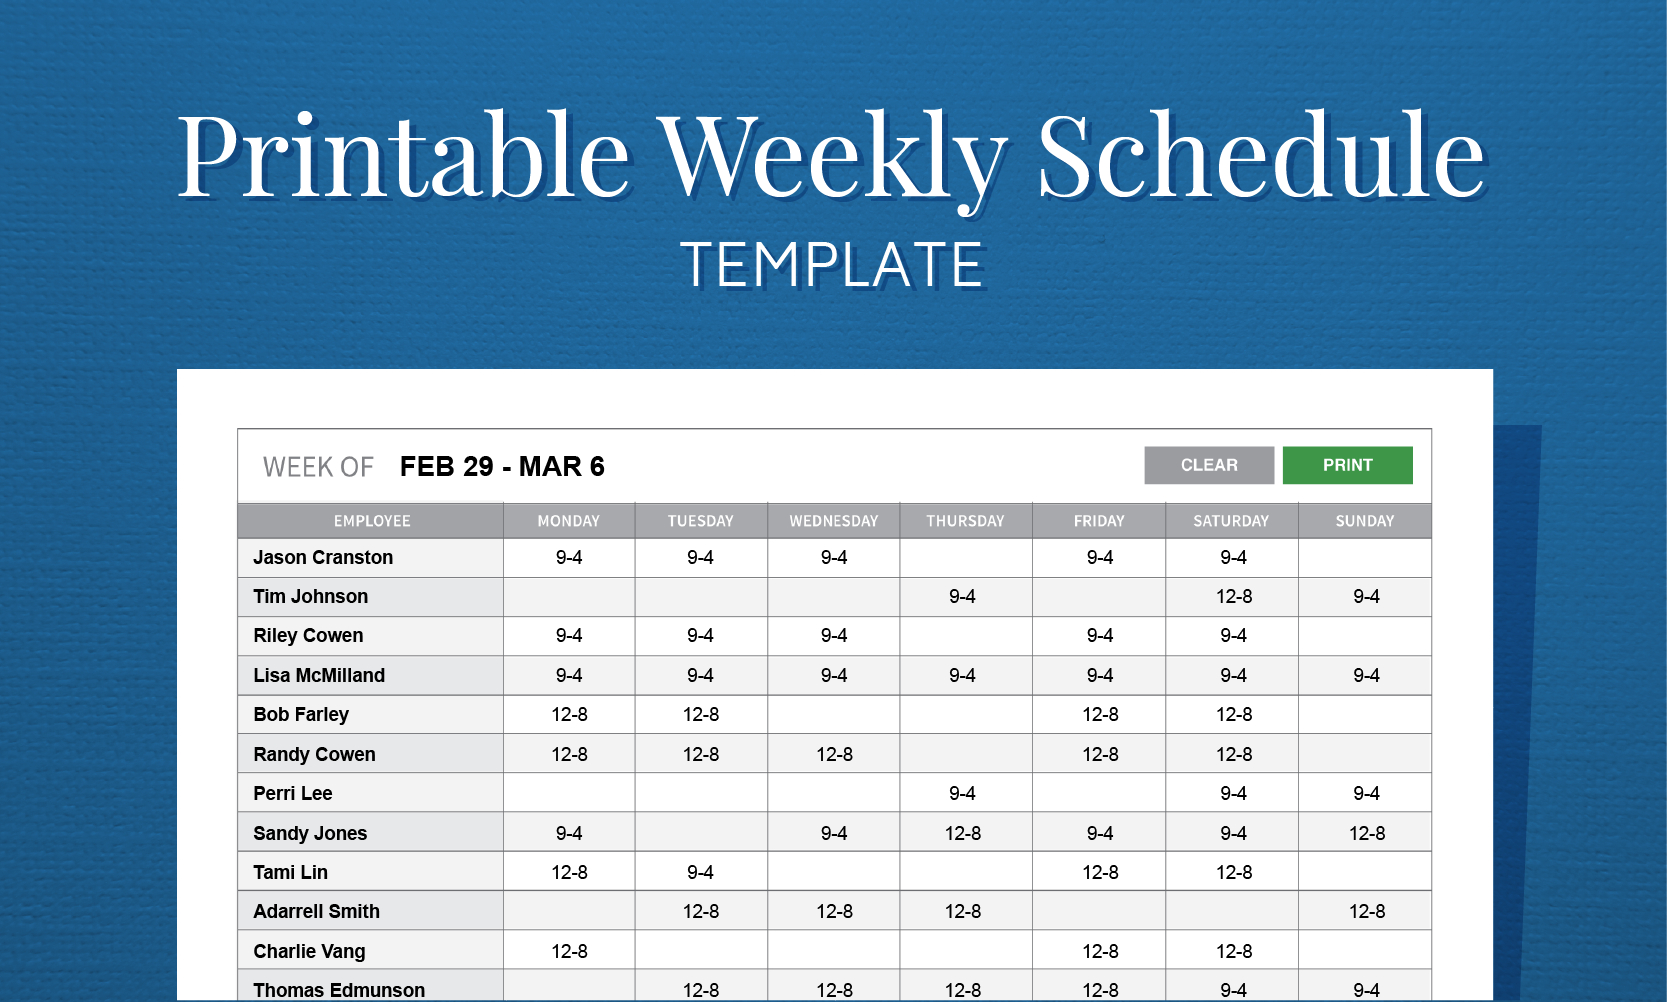 Free Staff Rota Spreadsheet In Free Printable Weekly Work Schedule Template For Employee Scheduling